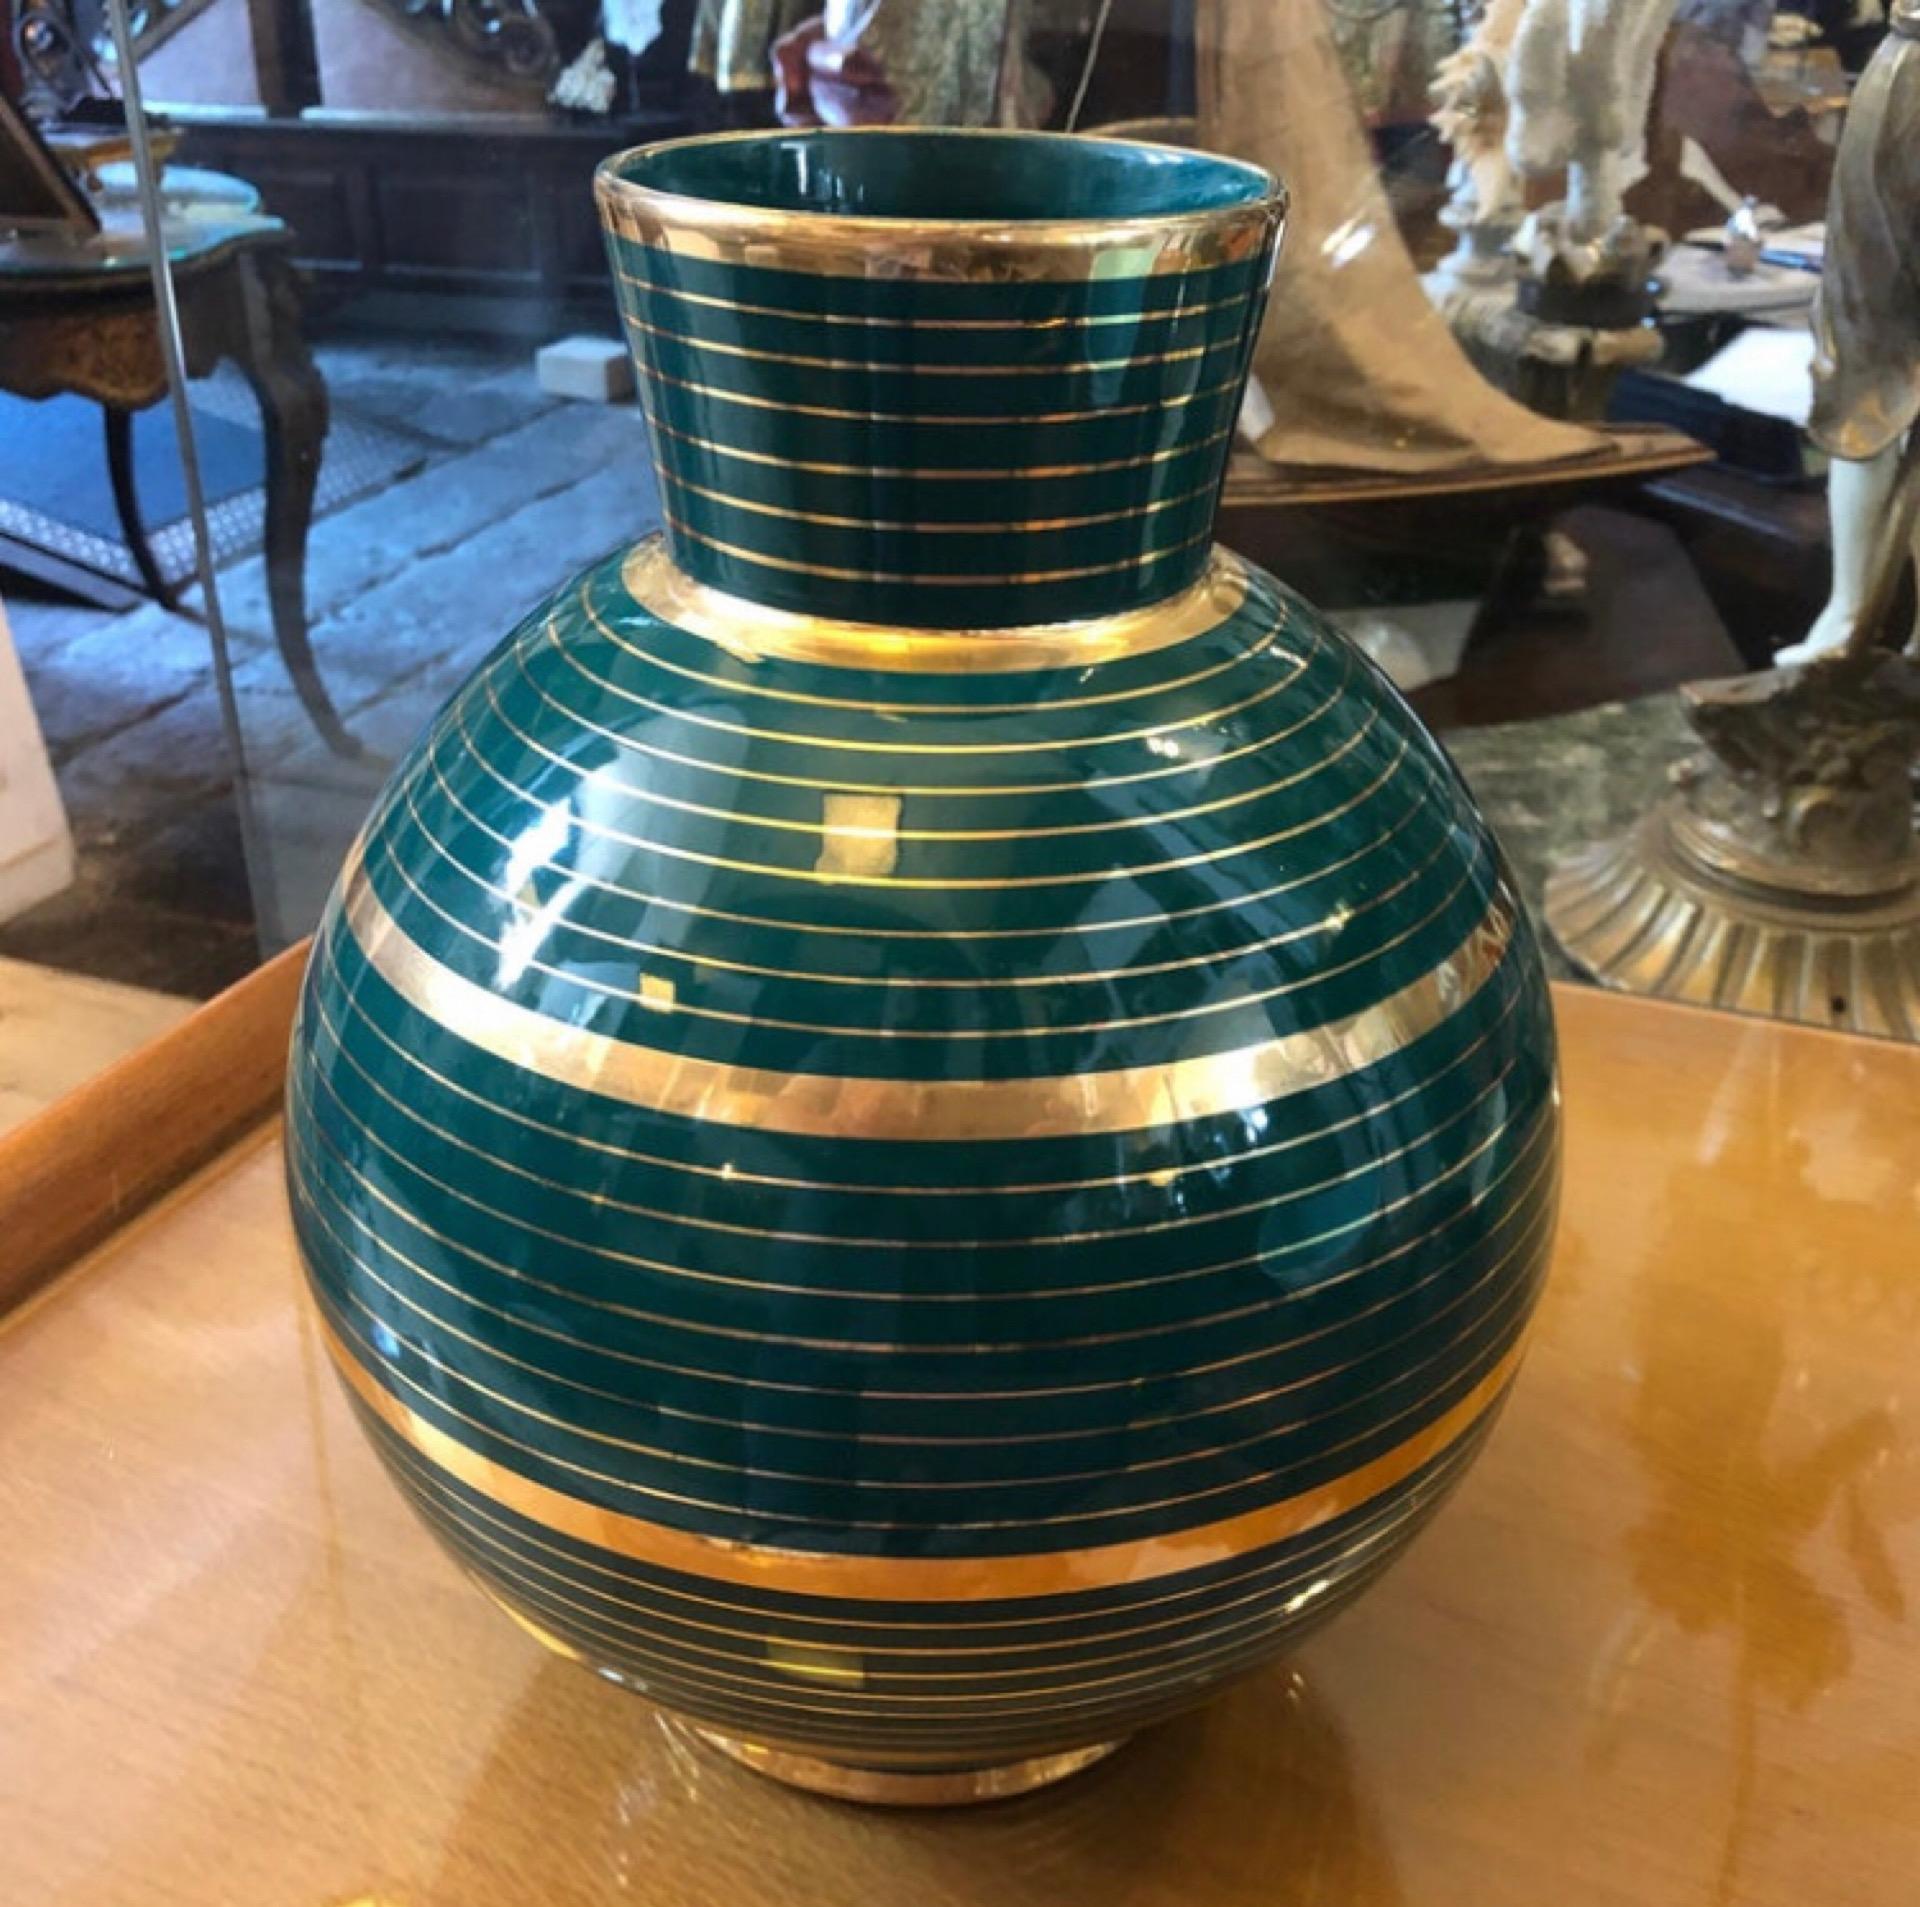 1960s Mid-Century Modern Green and Gold Ceramic Vase in the style of Giò Ponti 3